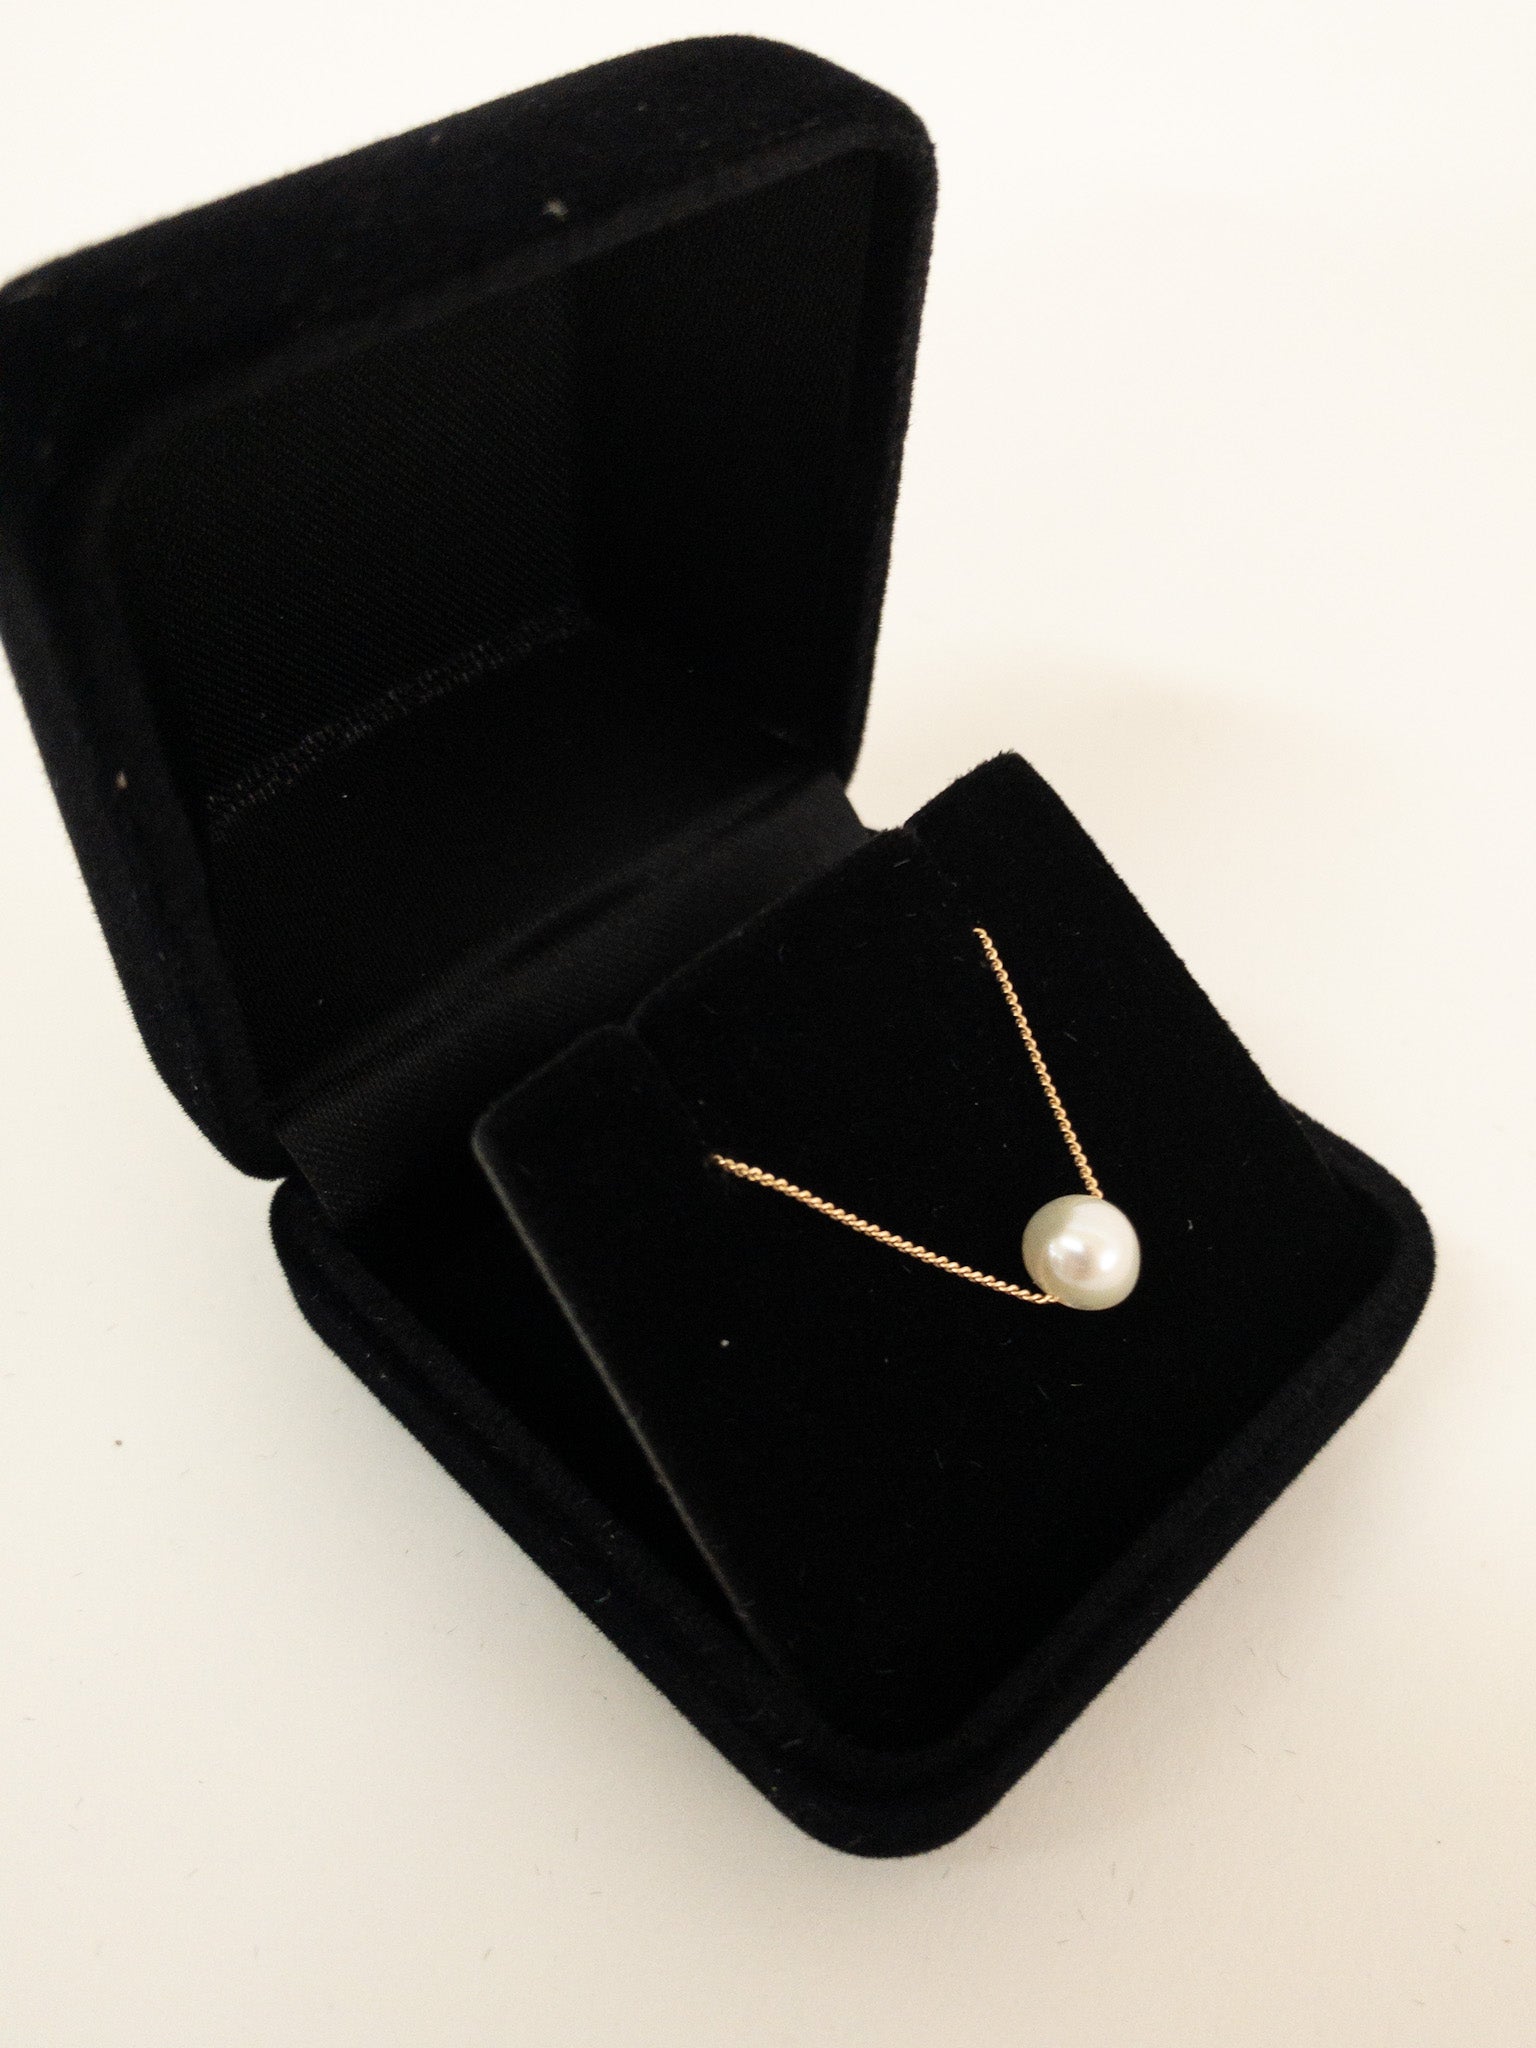 This dainty necklace features an A-grade freshwater pearl gracefully strung on a sterling silver curb chain, creating a classic and timeless look. necklace displayed inn velvet pendant box